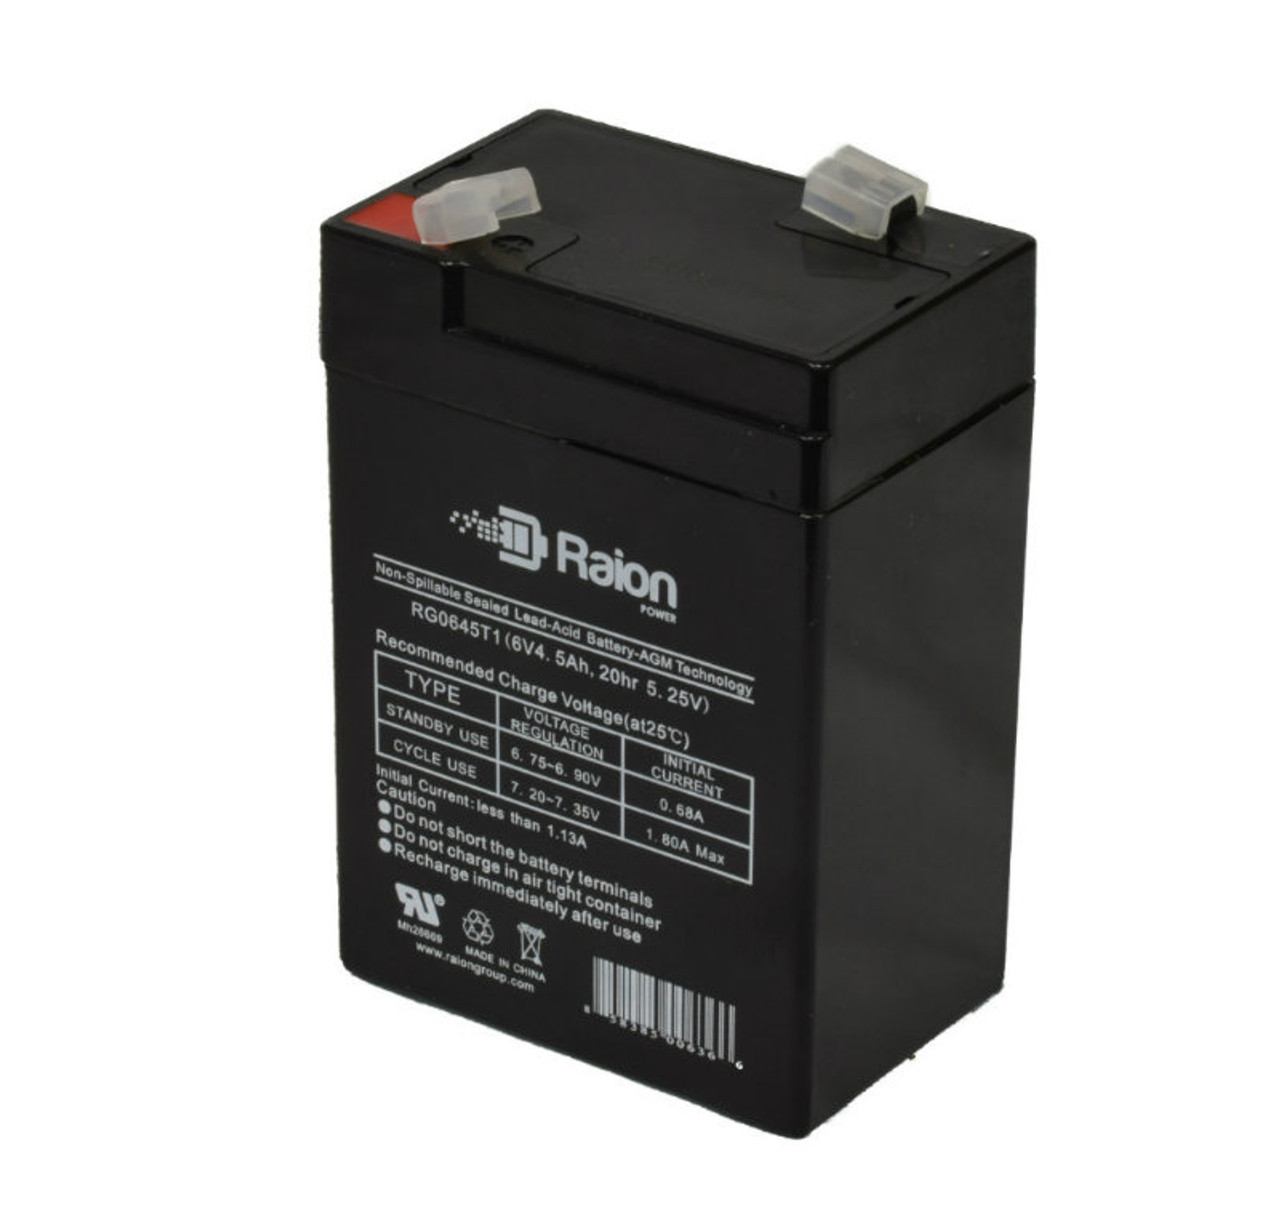 Raion Power RG0645T1 6V 4.5Ah Replacement Battery Cartridge for Light Alarms CE15AA